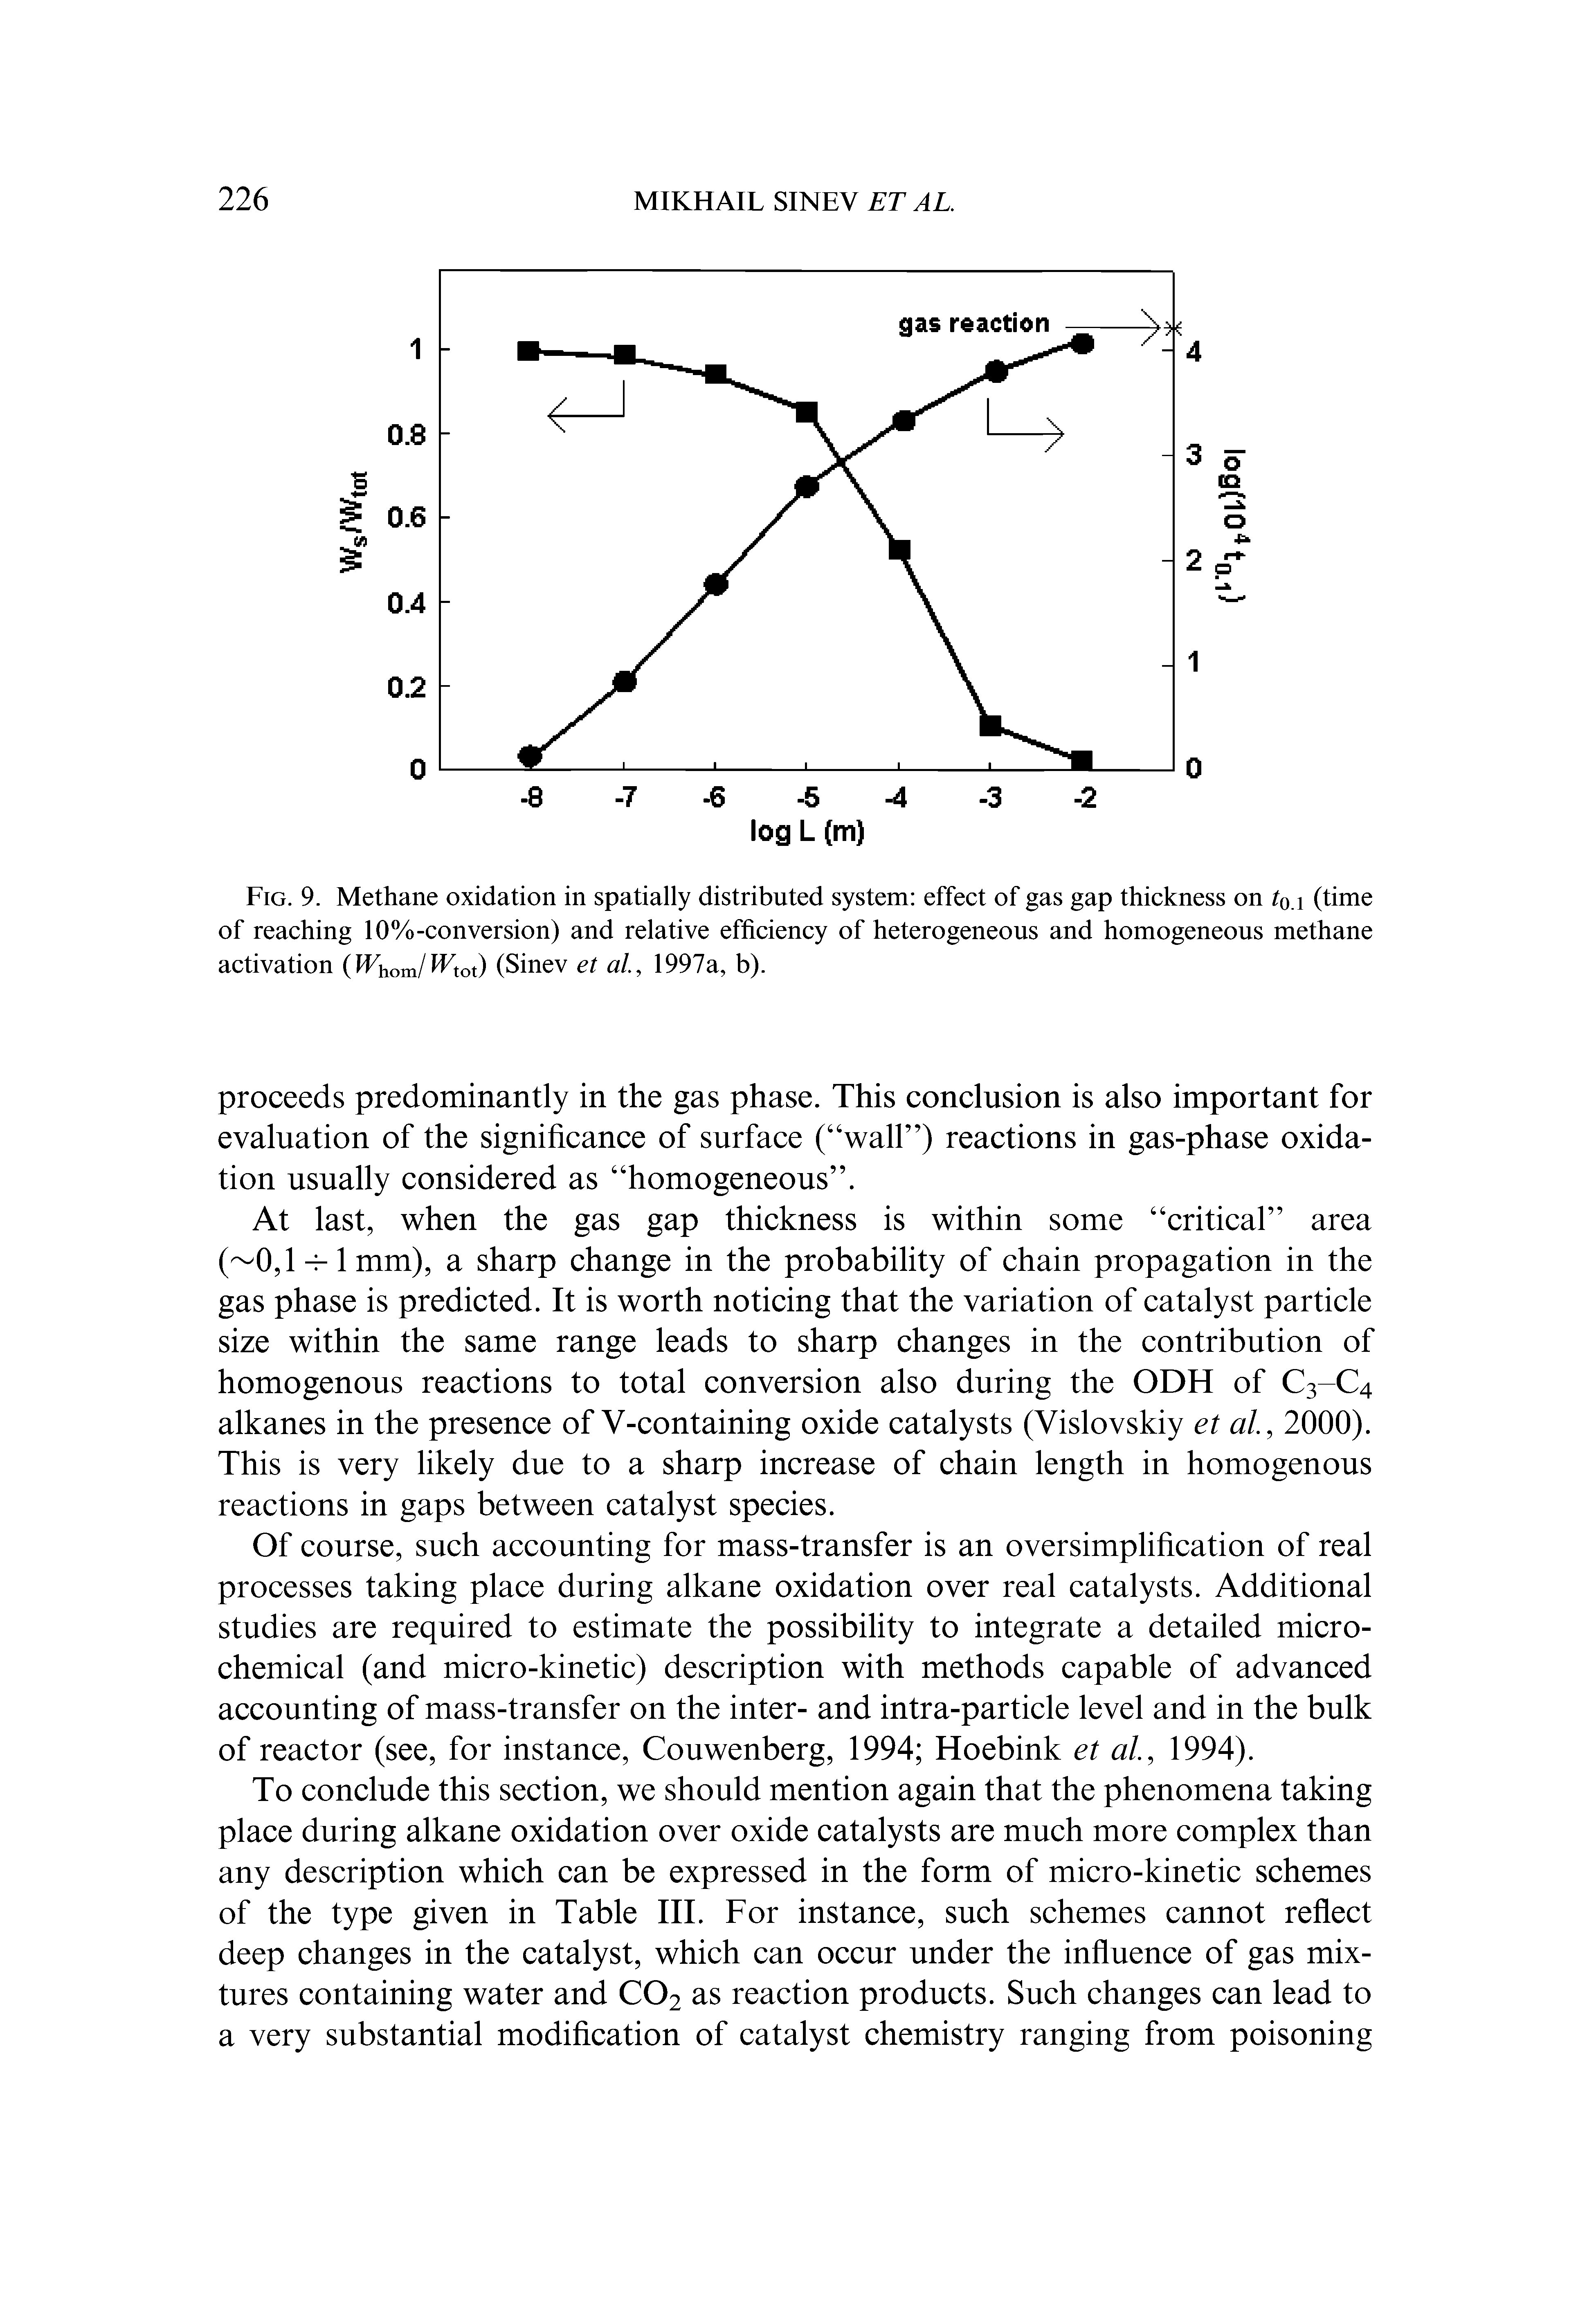 Fig. 9. Methane oxidation in spatially distributed system effect of gas gap thickness on 0.i (time of reaching 10%-conversion) and relative efficiency of heterogeneous and homogeneous methane activation (Ifhom/ tot) (Sinev et al, 1997a, b).